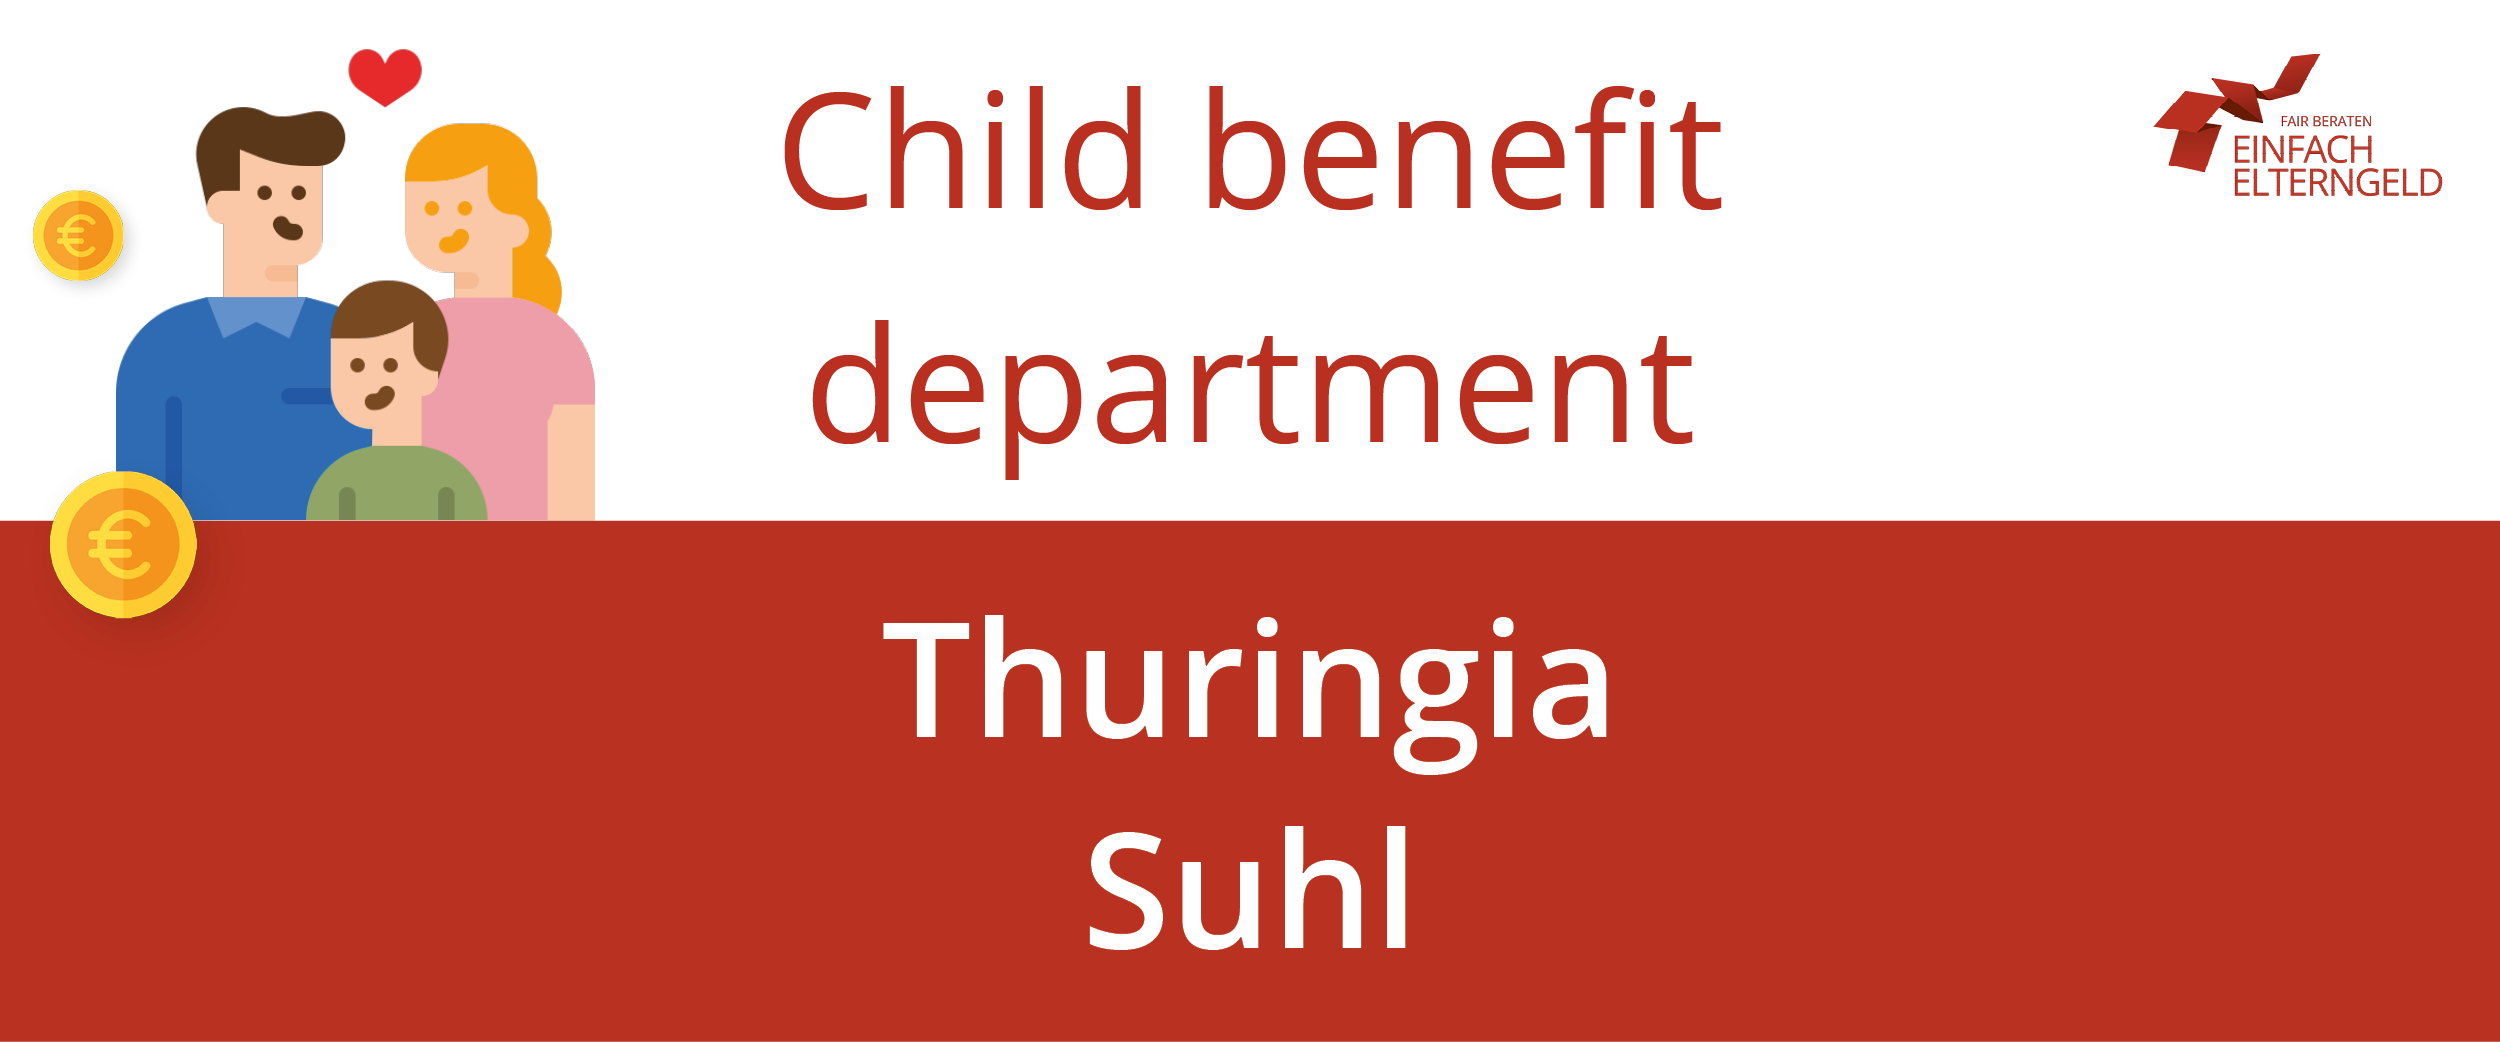 We present you the Child benefit department Thuringia Suhl.